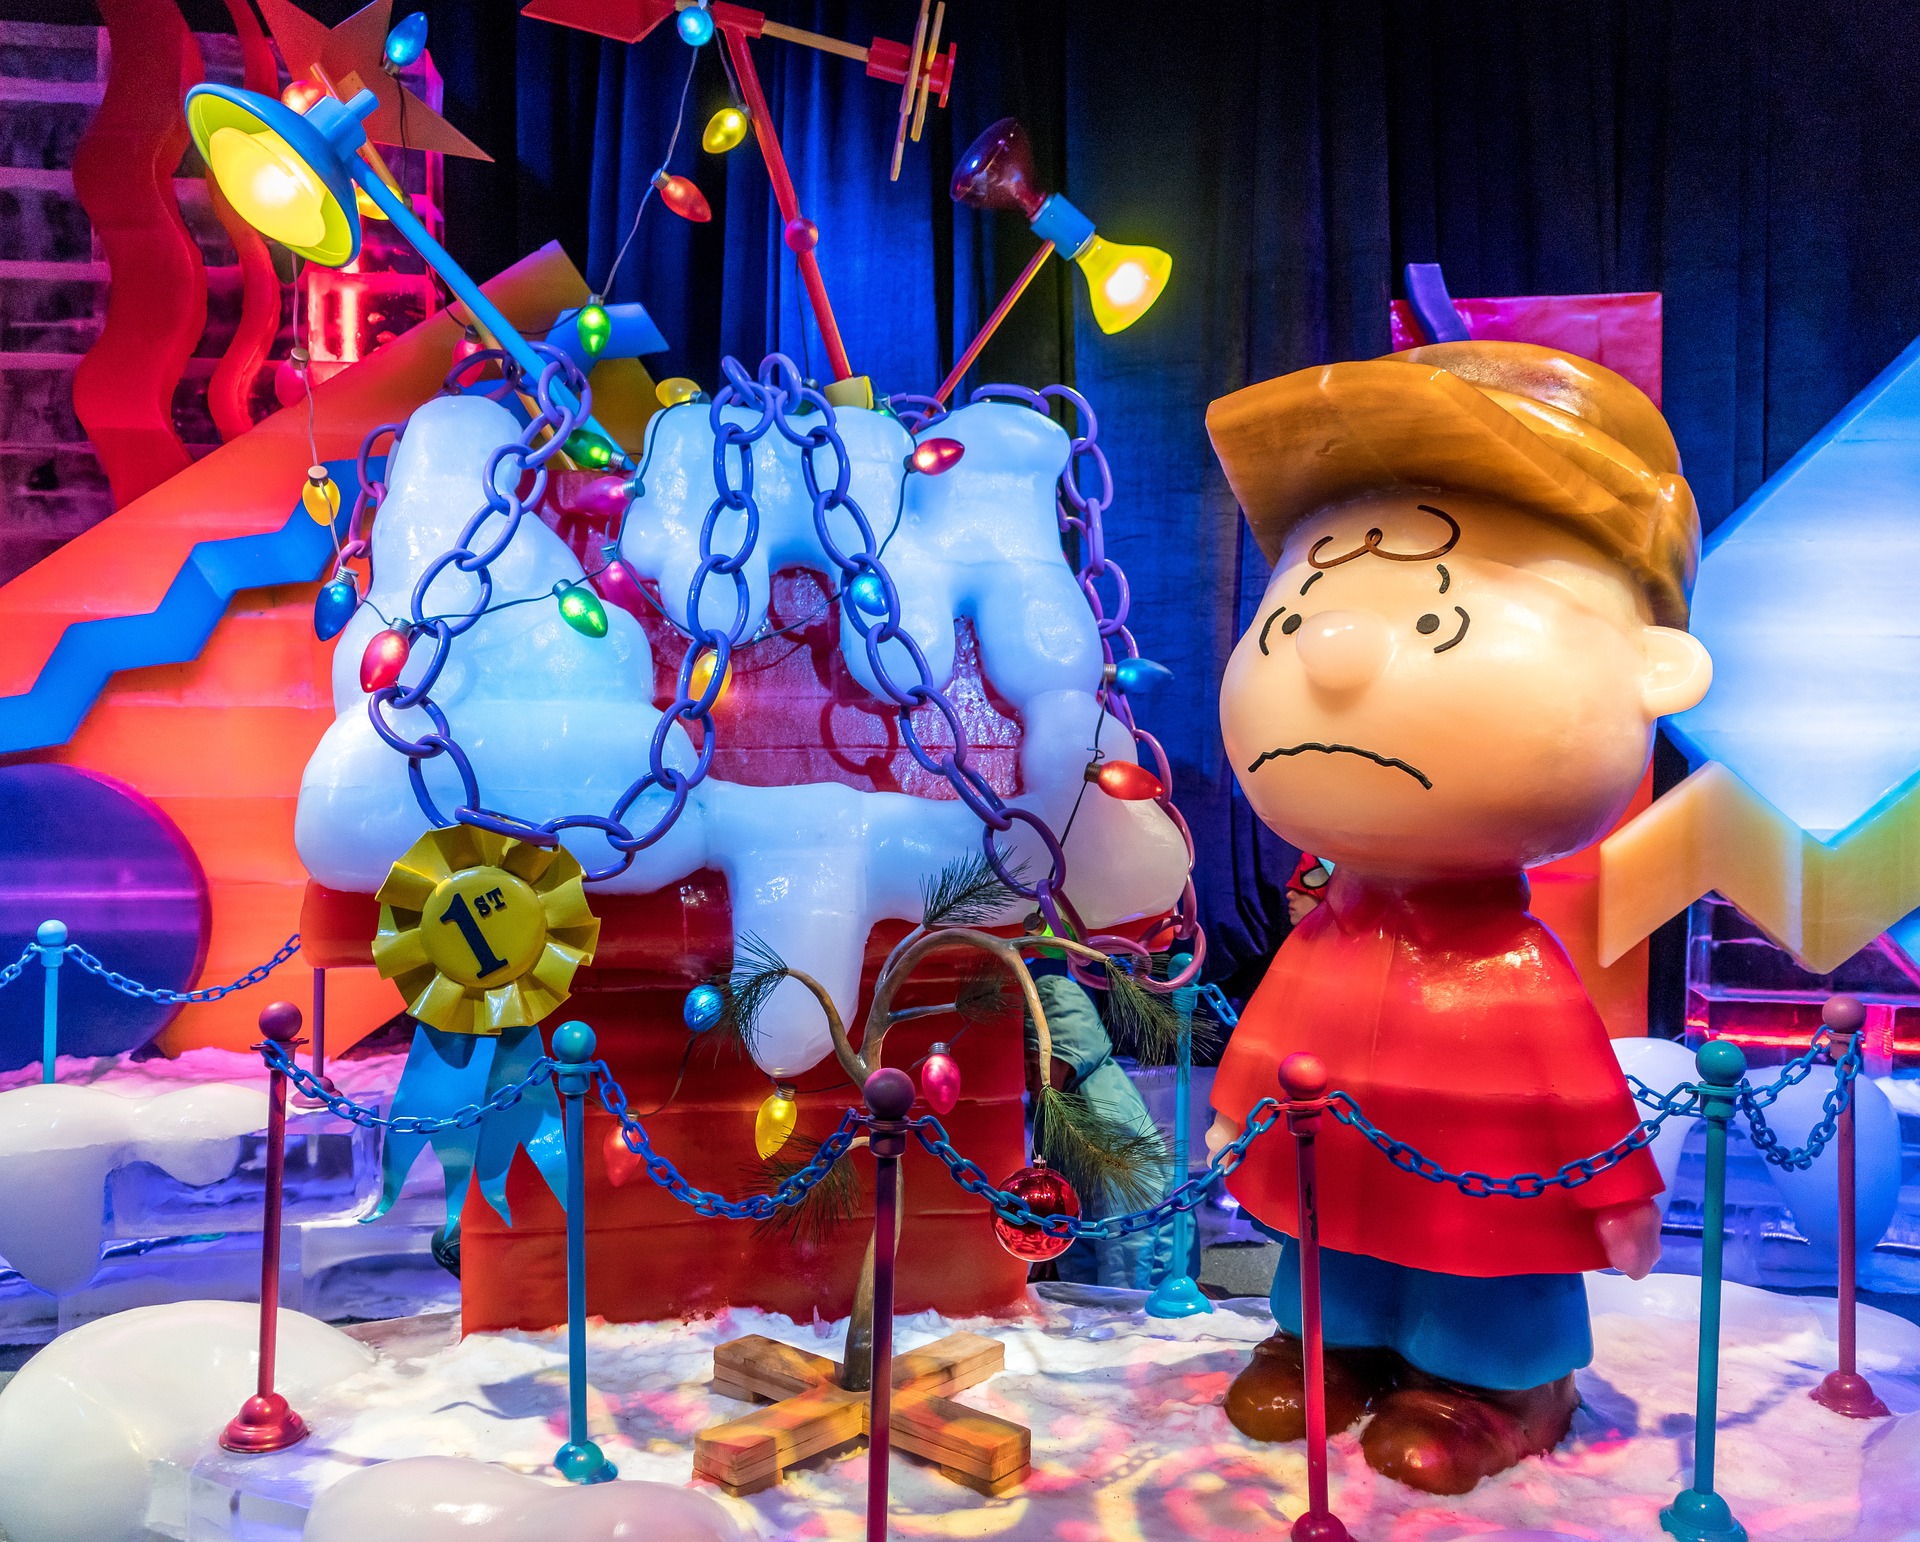 Ice sculpture of Charlie Brown at doghouse